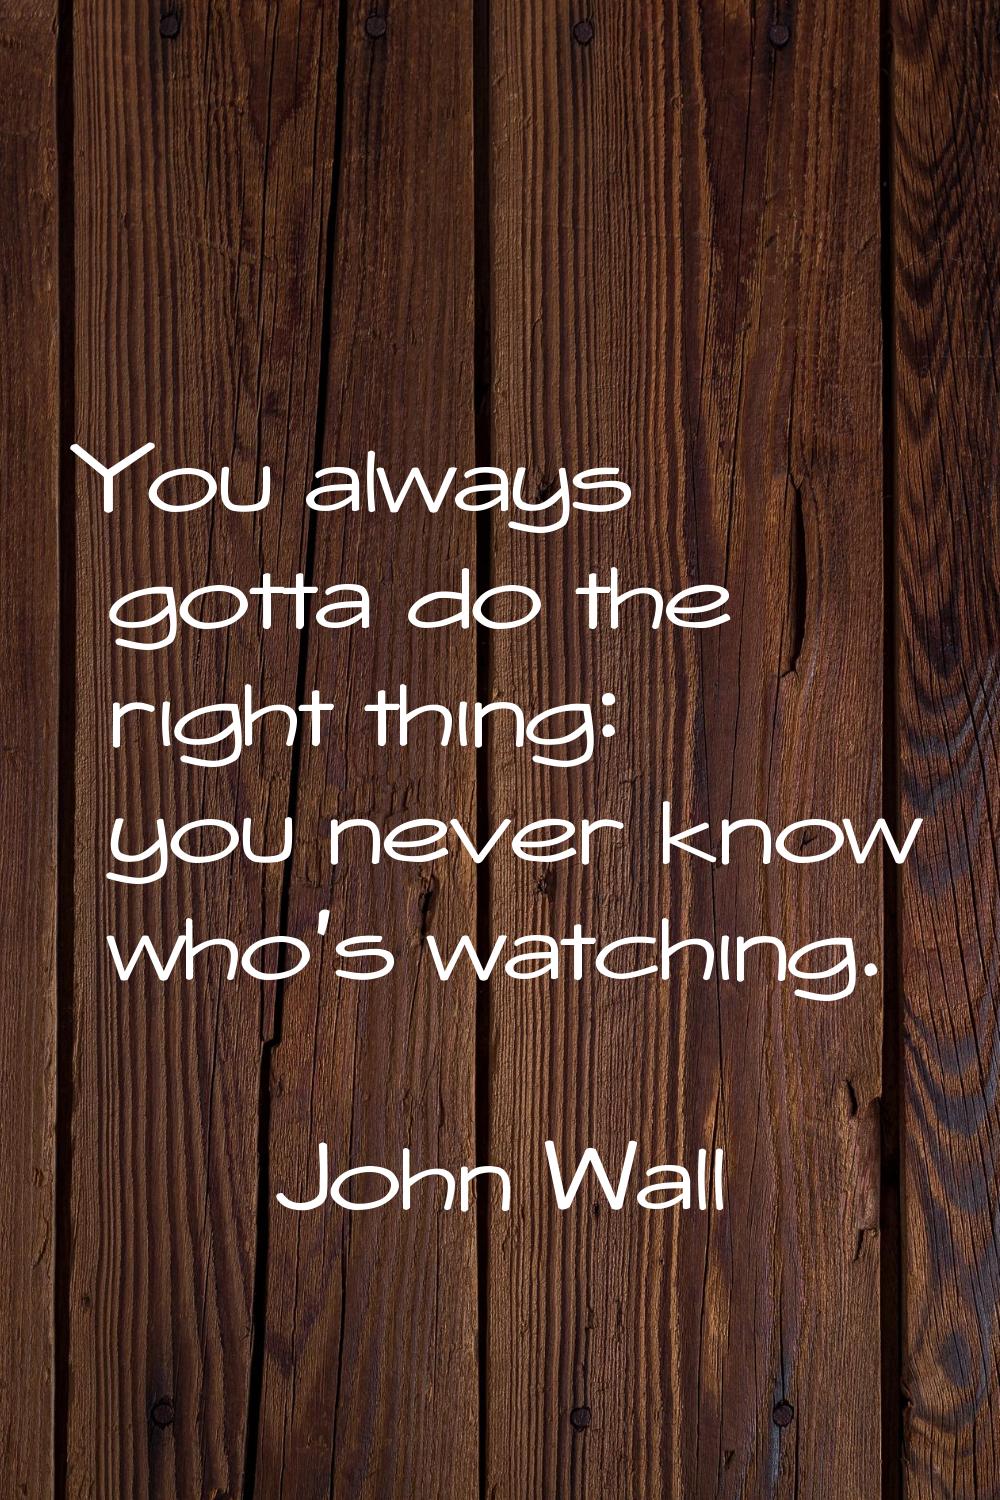 You always gotta do the right thing: you never know who's watching.